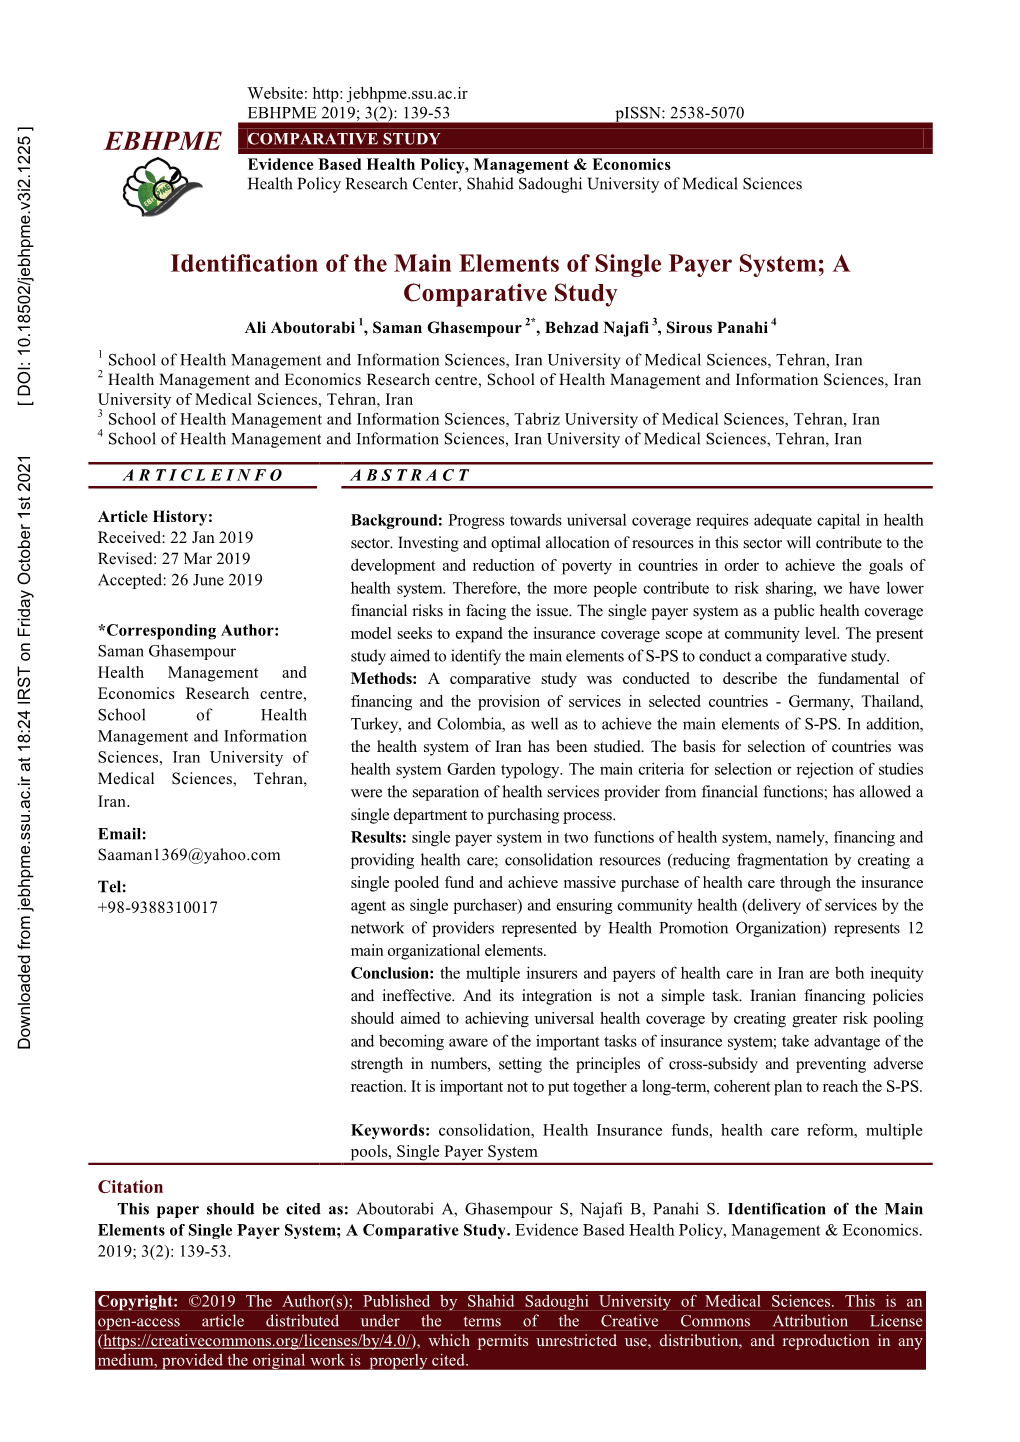 Identification of the Main Elements of Single Payer System